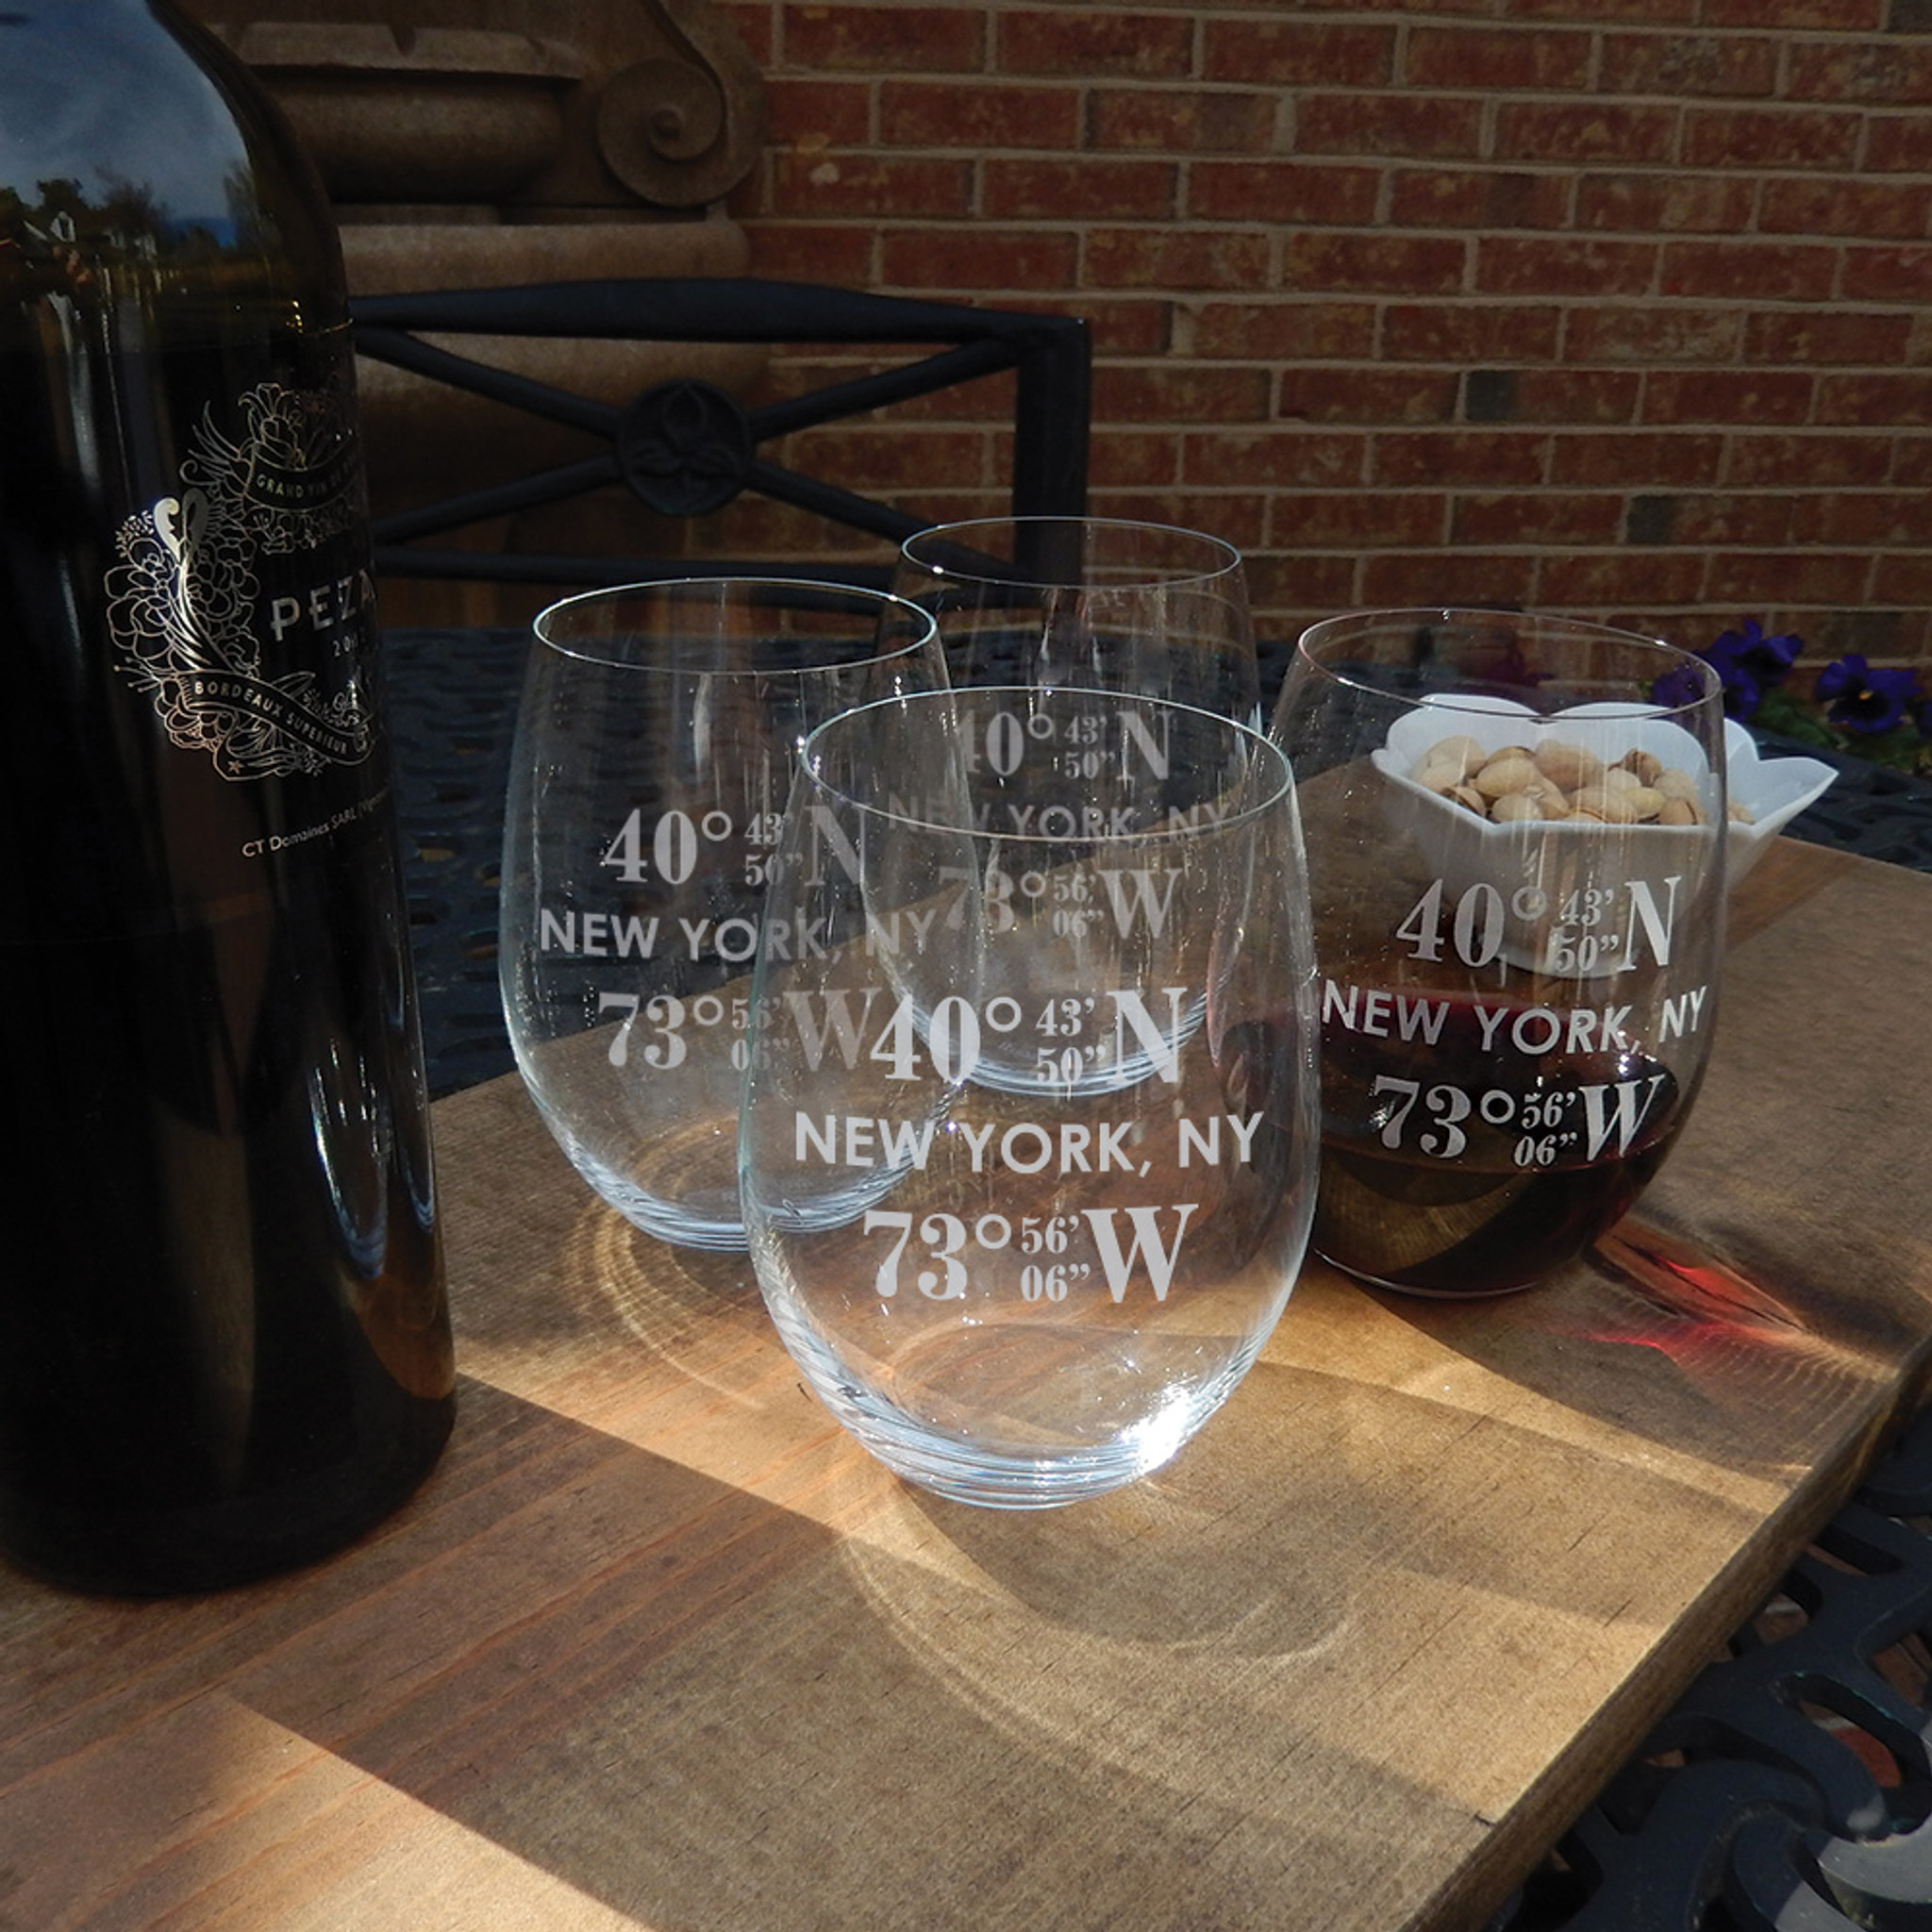 Custom Etched Stemless Wine Glasses